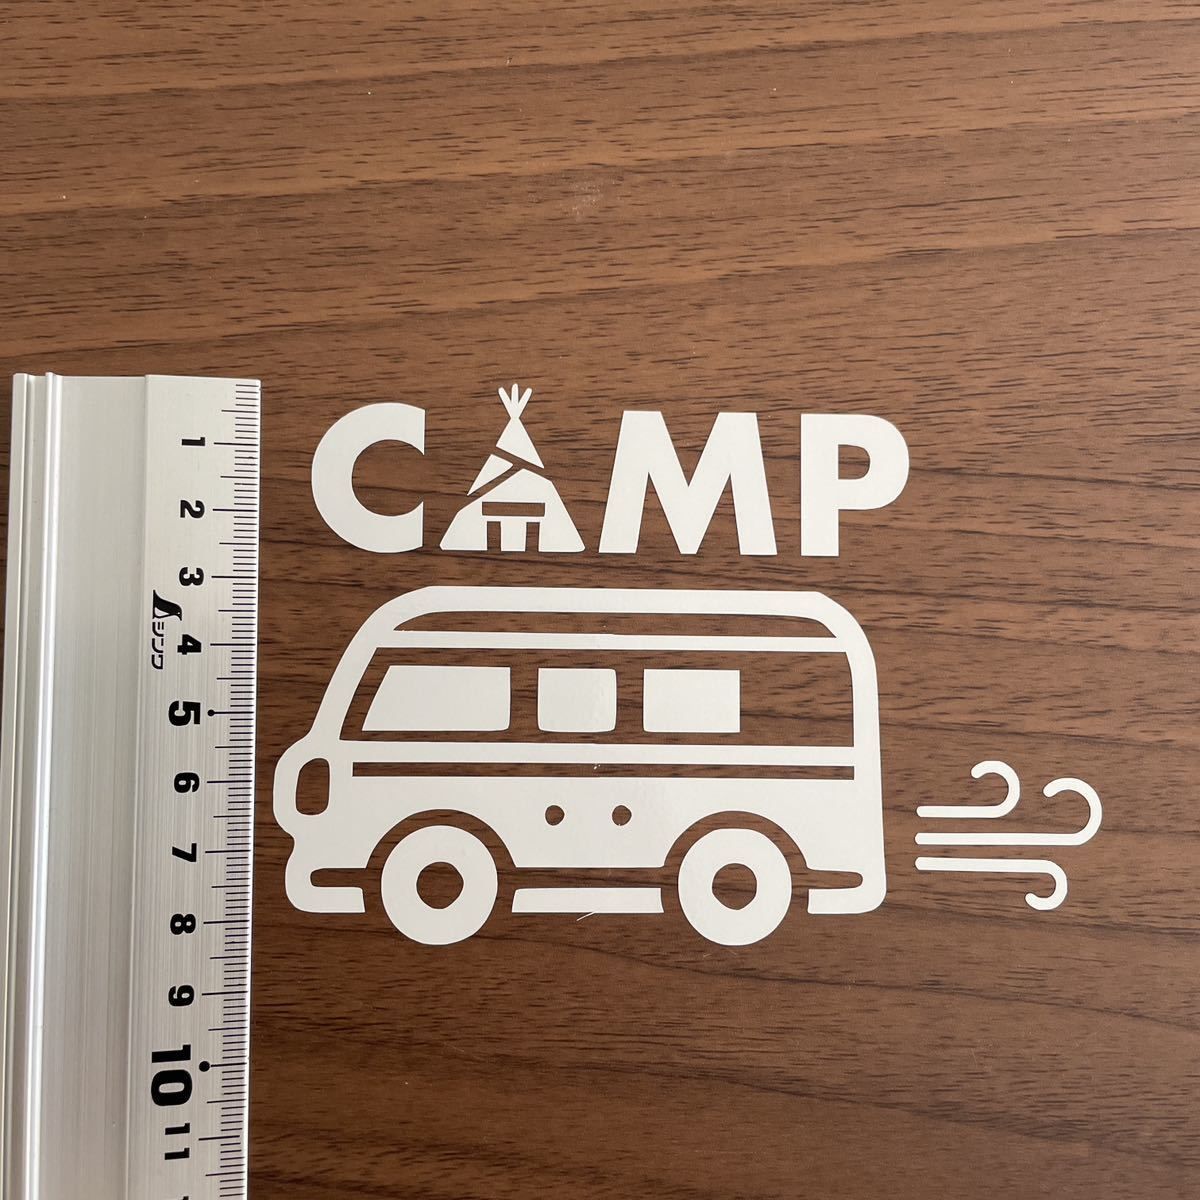 180. [ free shipping ] CAMP cutting sticker camp tent bus outdoor [ new goods ]